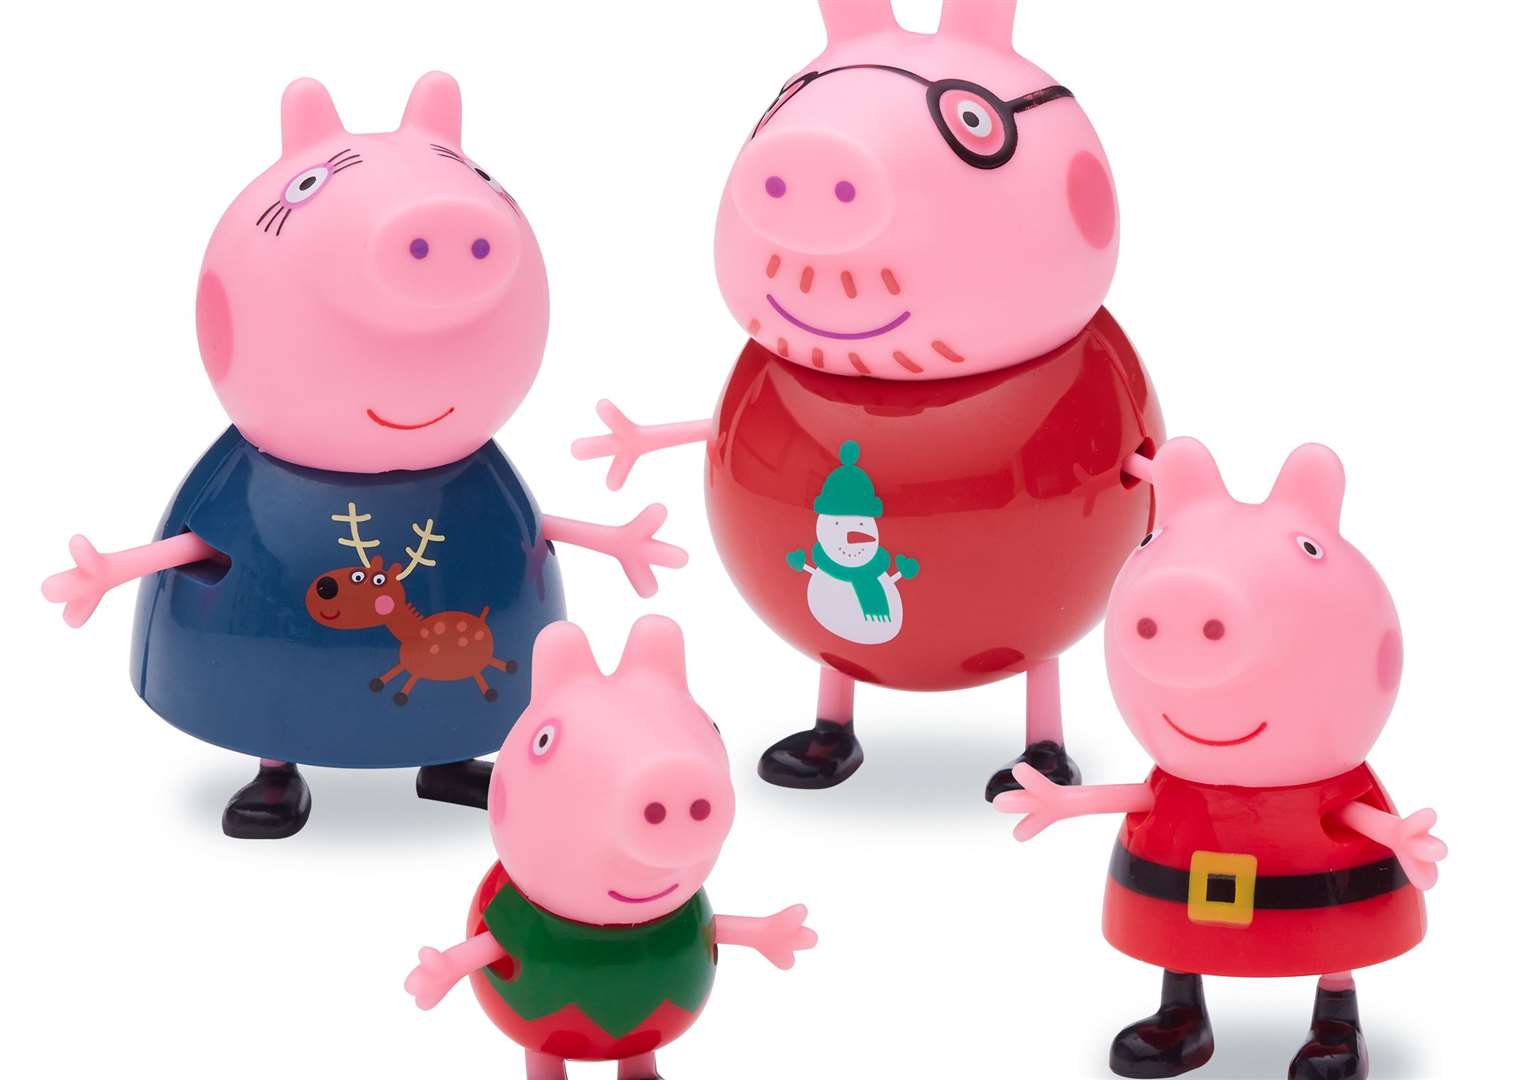 The Entertainer is selling an exclusive, limited edition toy set of the Peppa Pig family - each wearing their own Christmas jumper